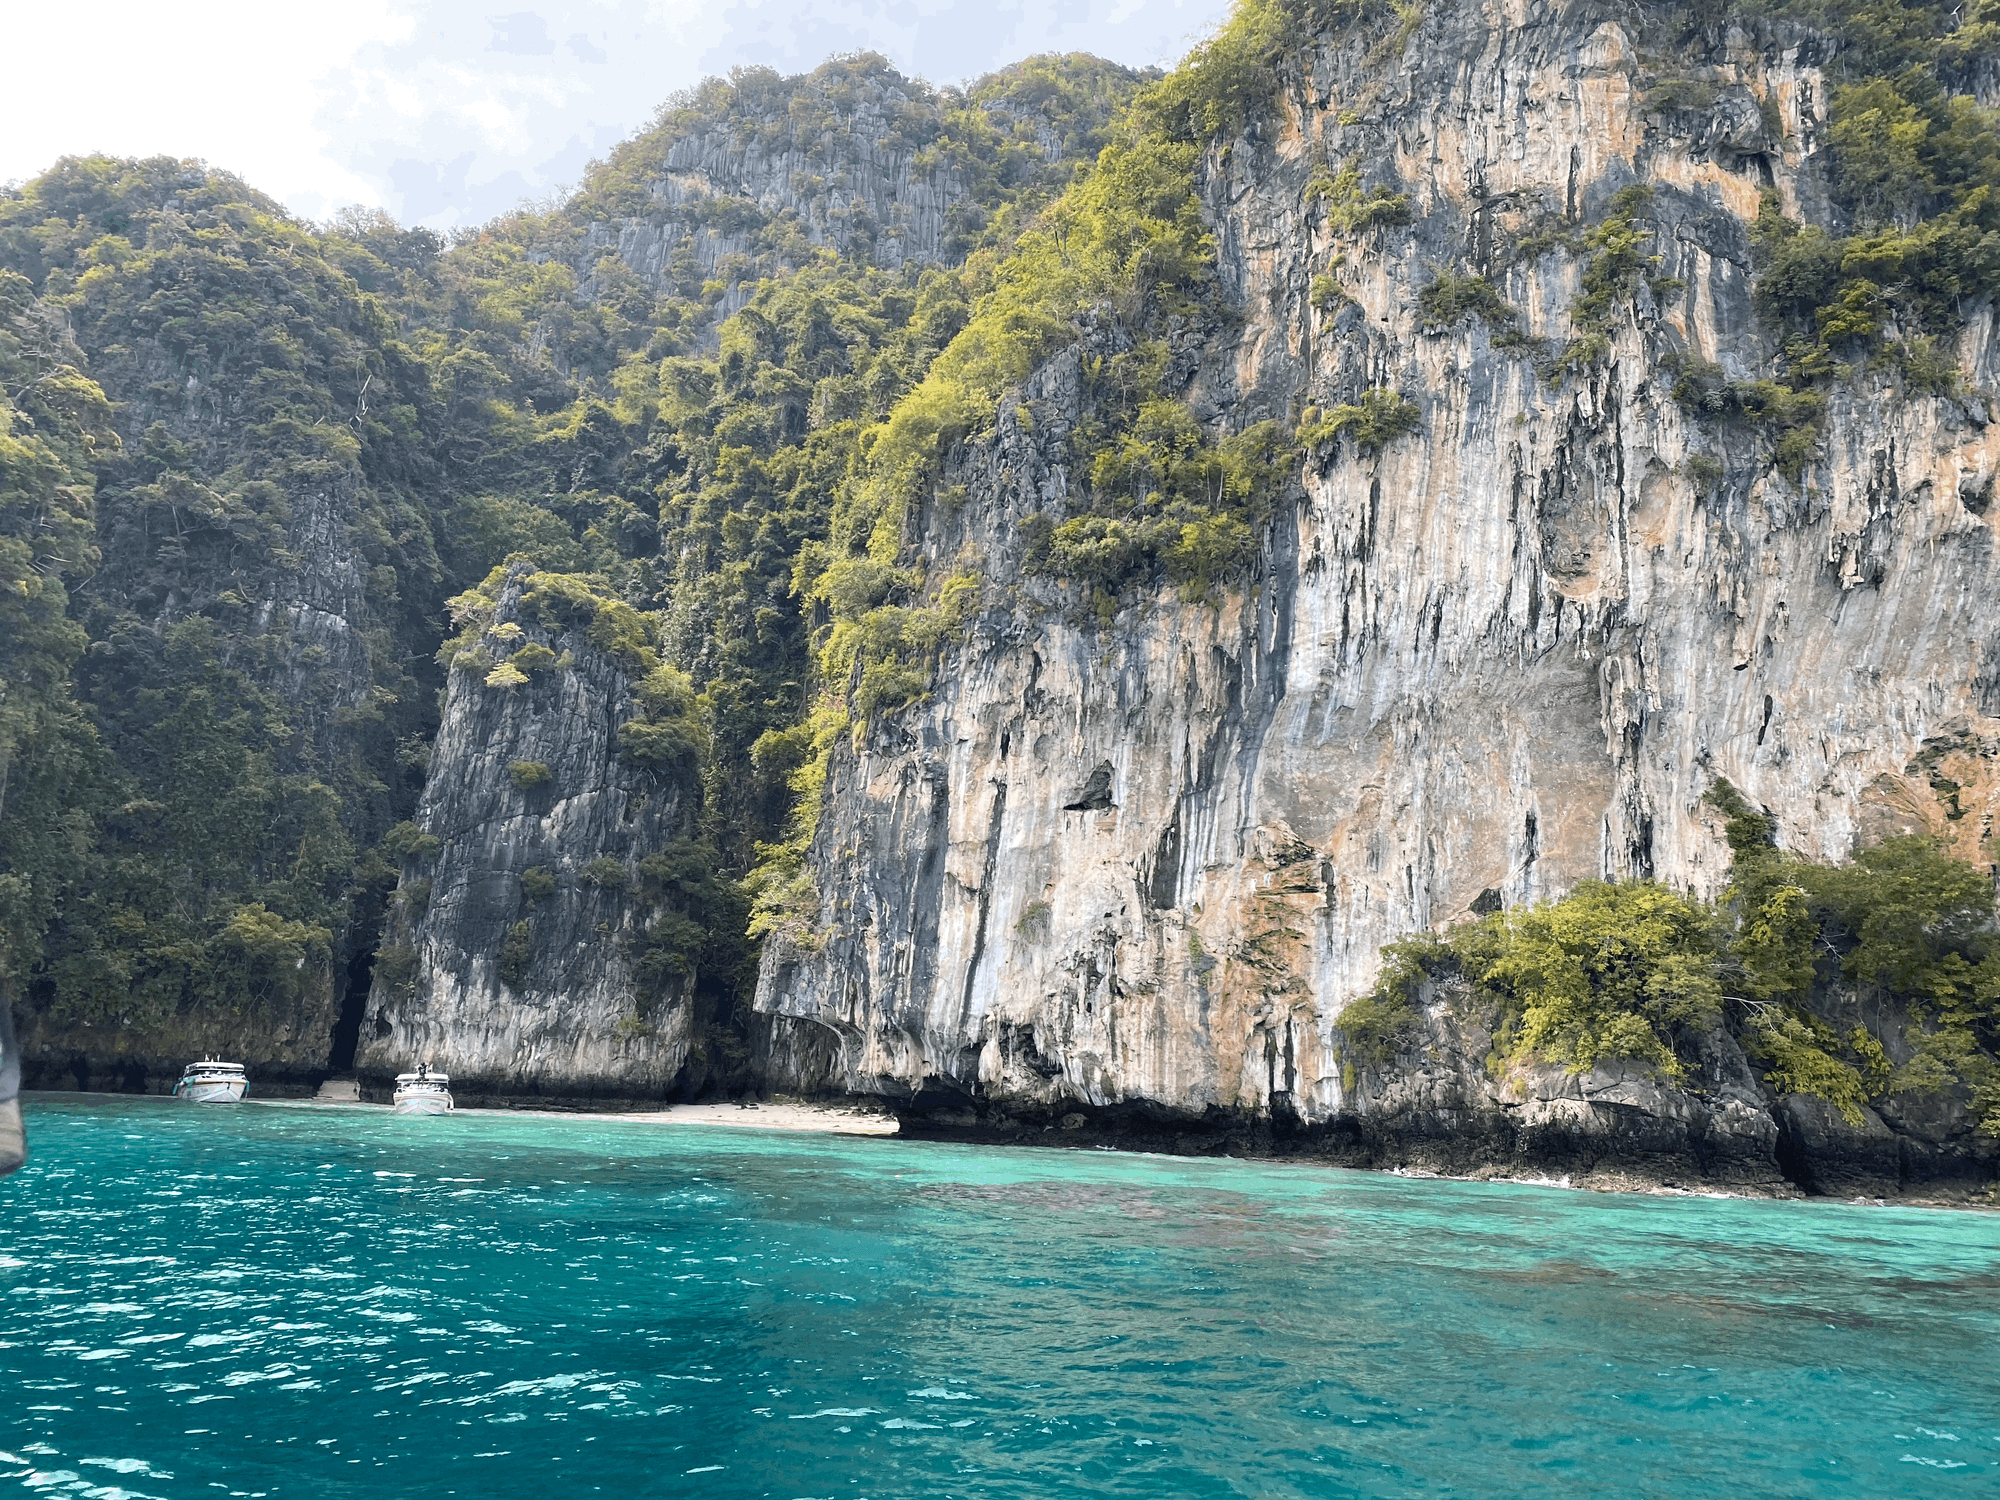 My Thailand Itinerary: 8 Days of bliss